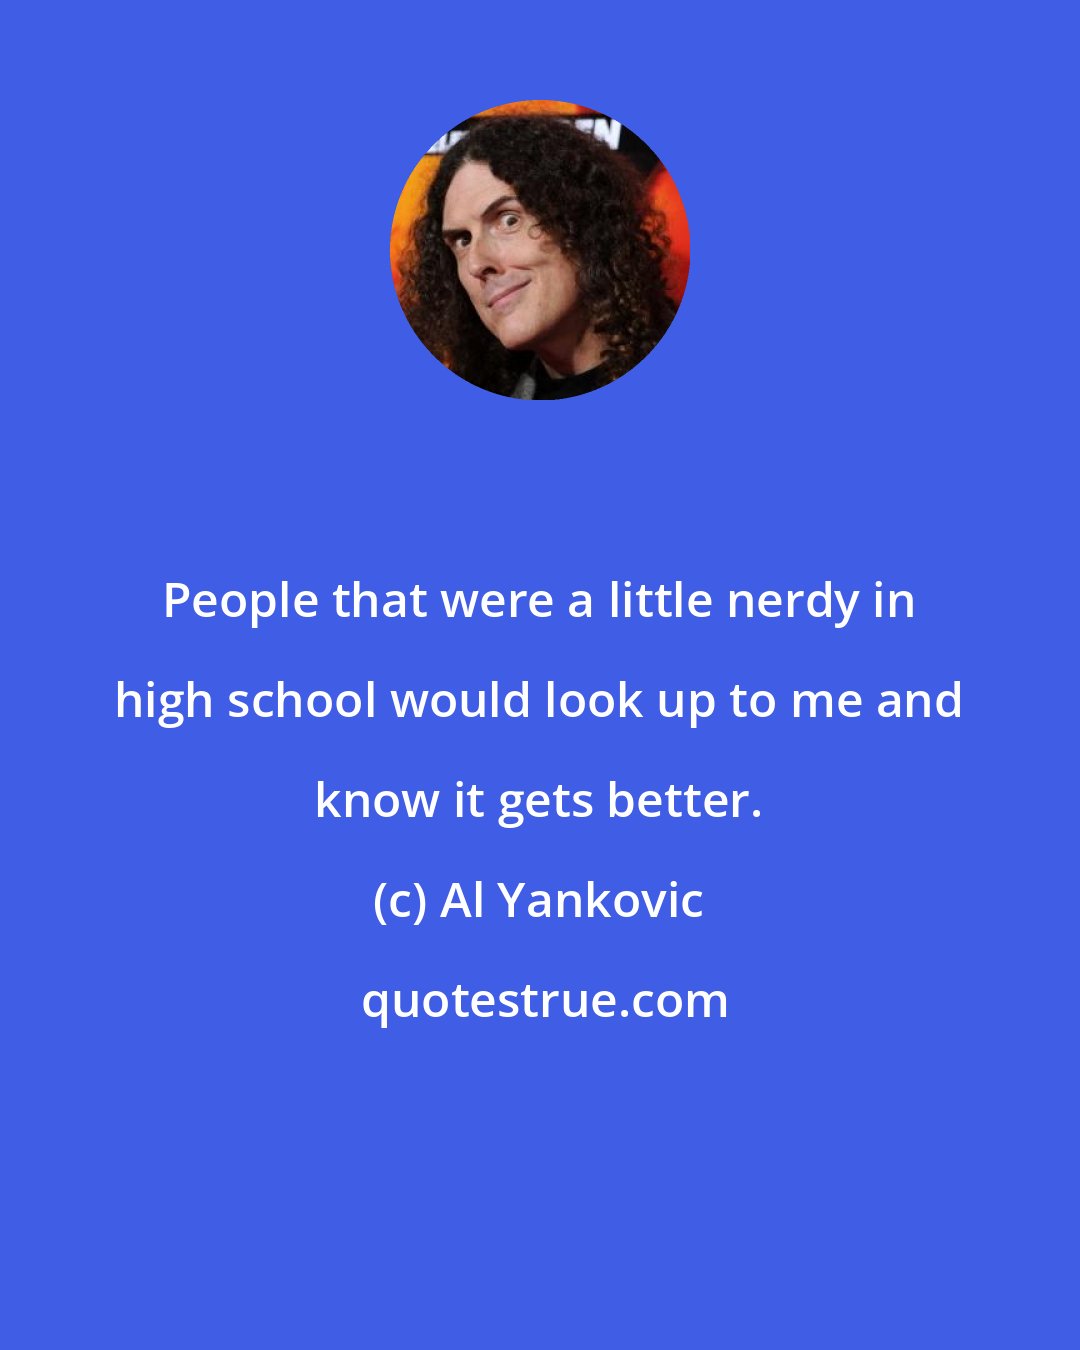 Al Yankovic: People that were a little nerdy in high school would look up to me and know it gets better.